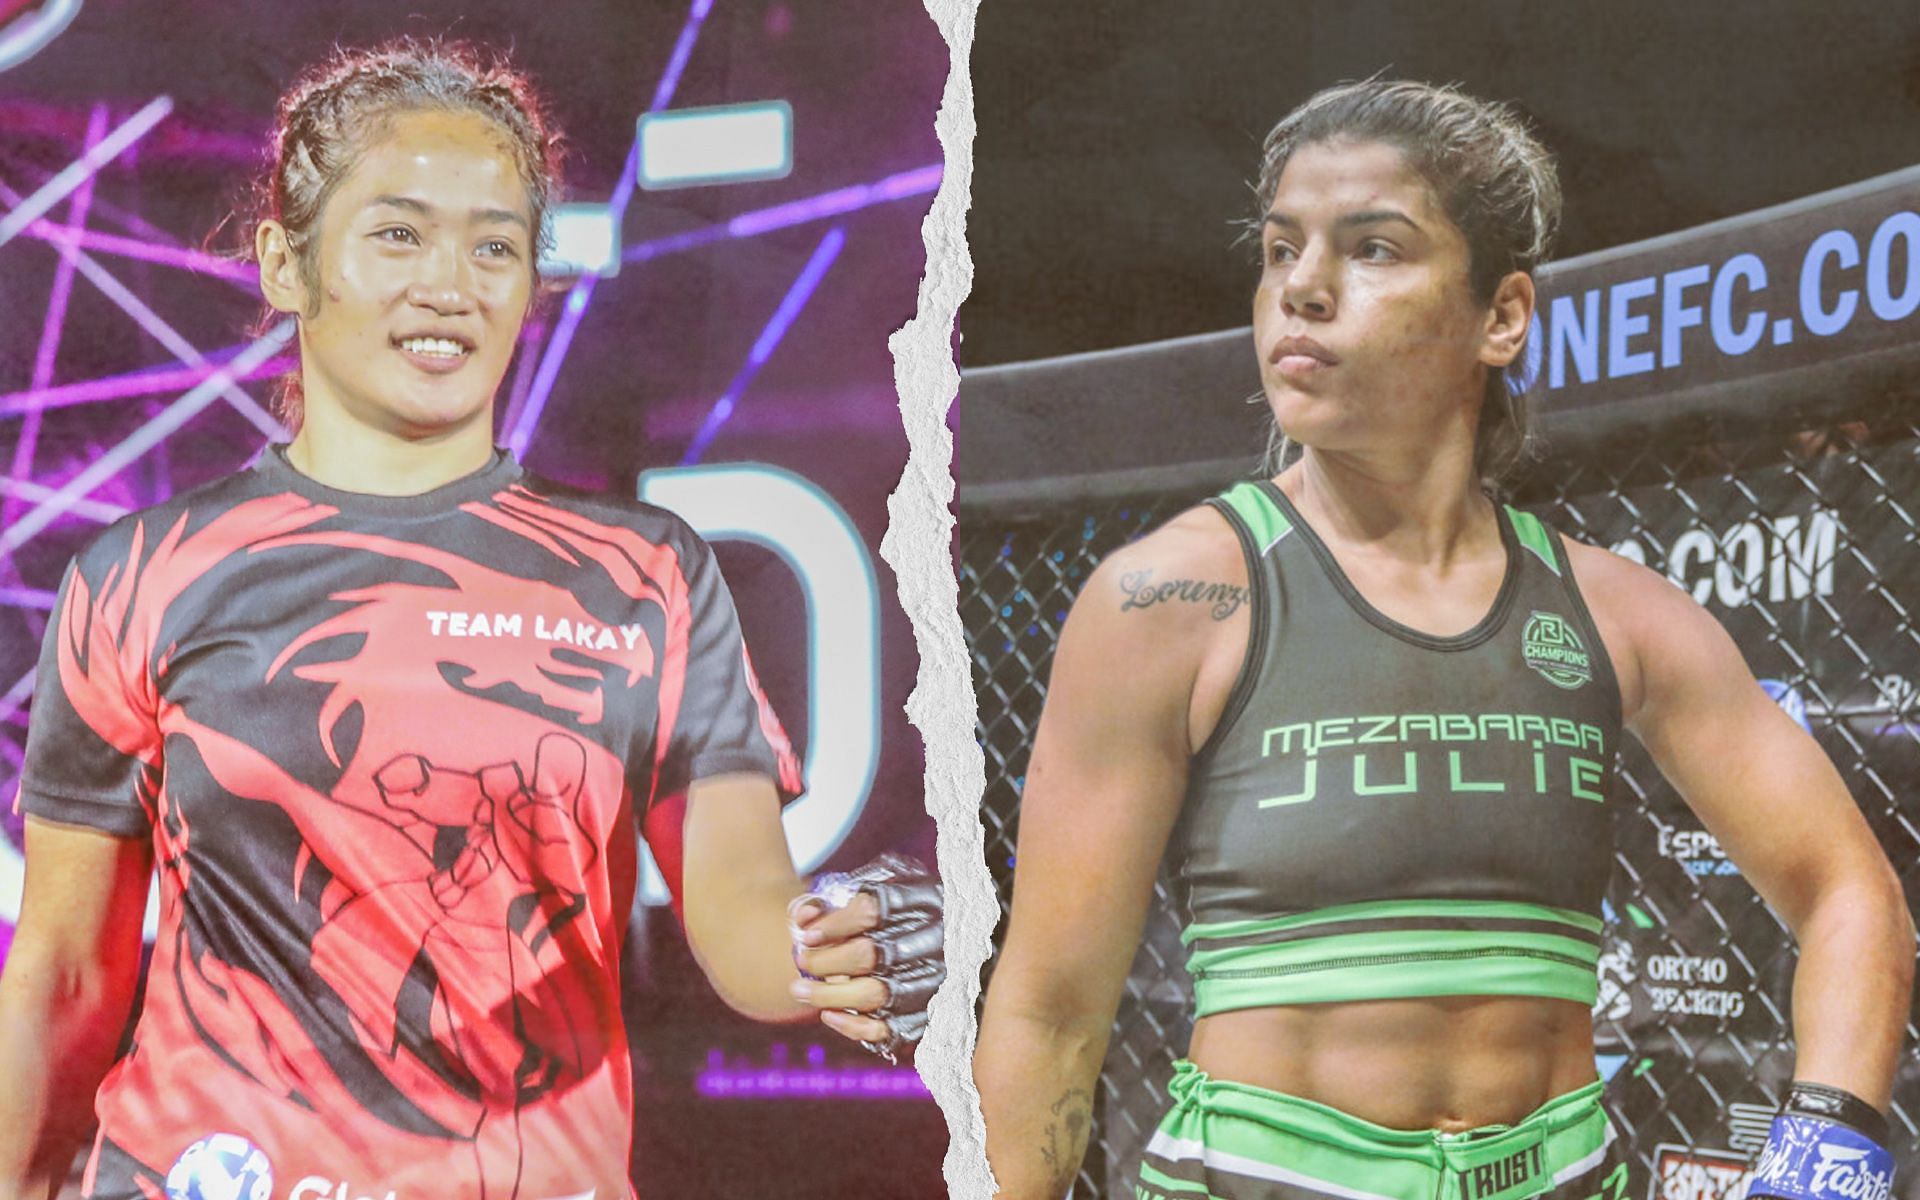 Jenelyn Olsim (L) will face Julie Mezabarba (R) at ONE 158 as per Team Lakay. | [Photos: ONE Championship]